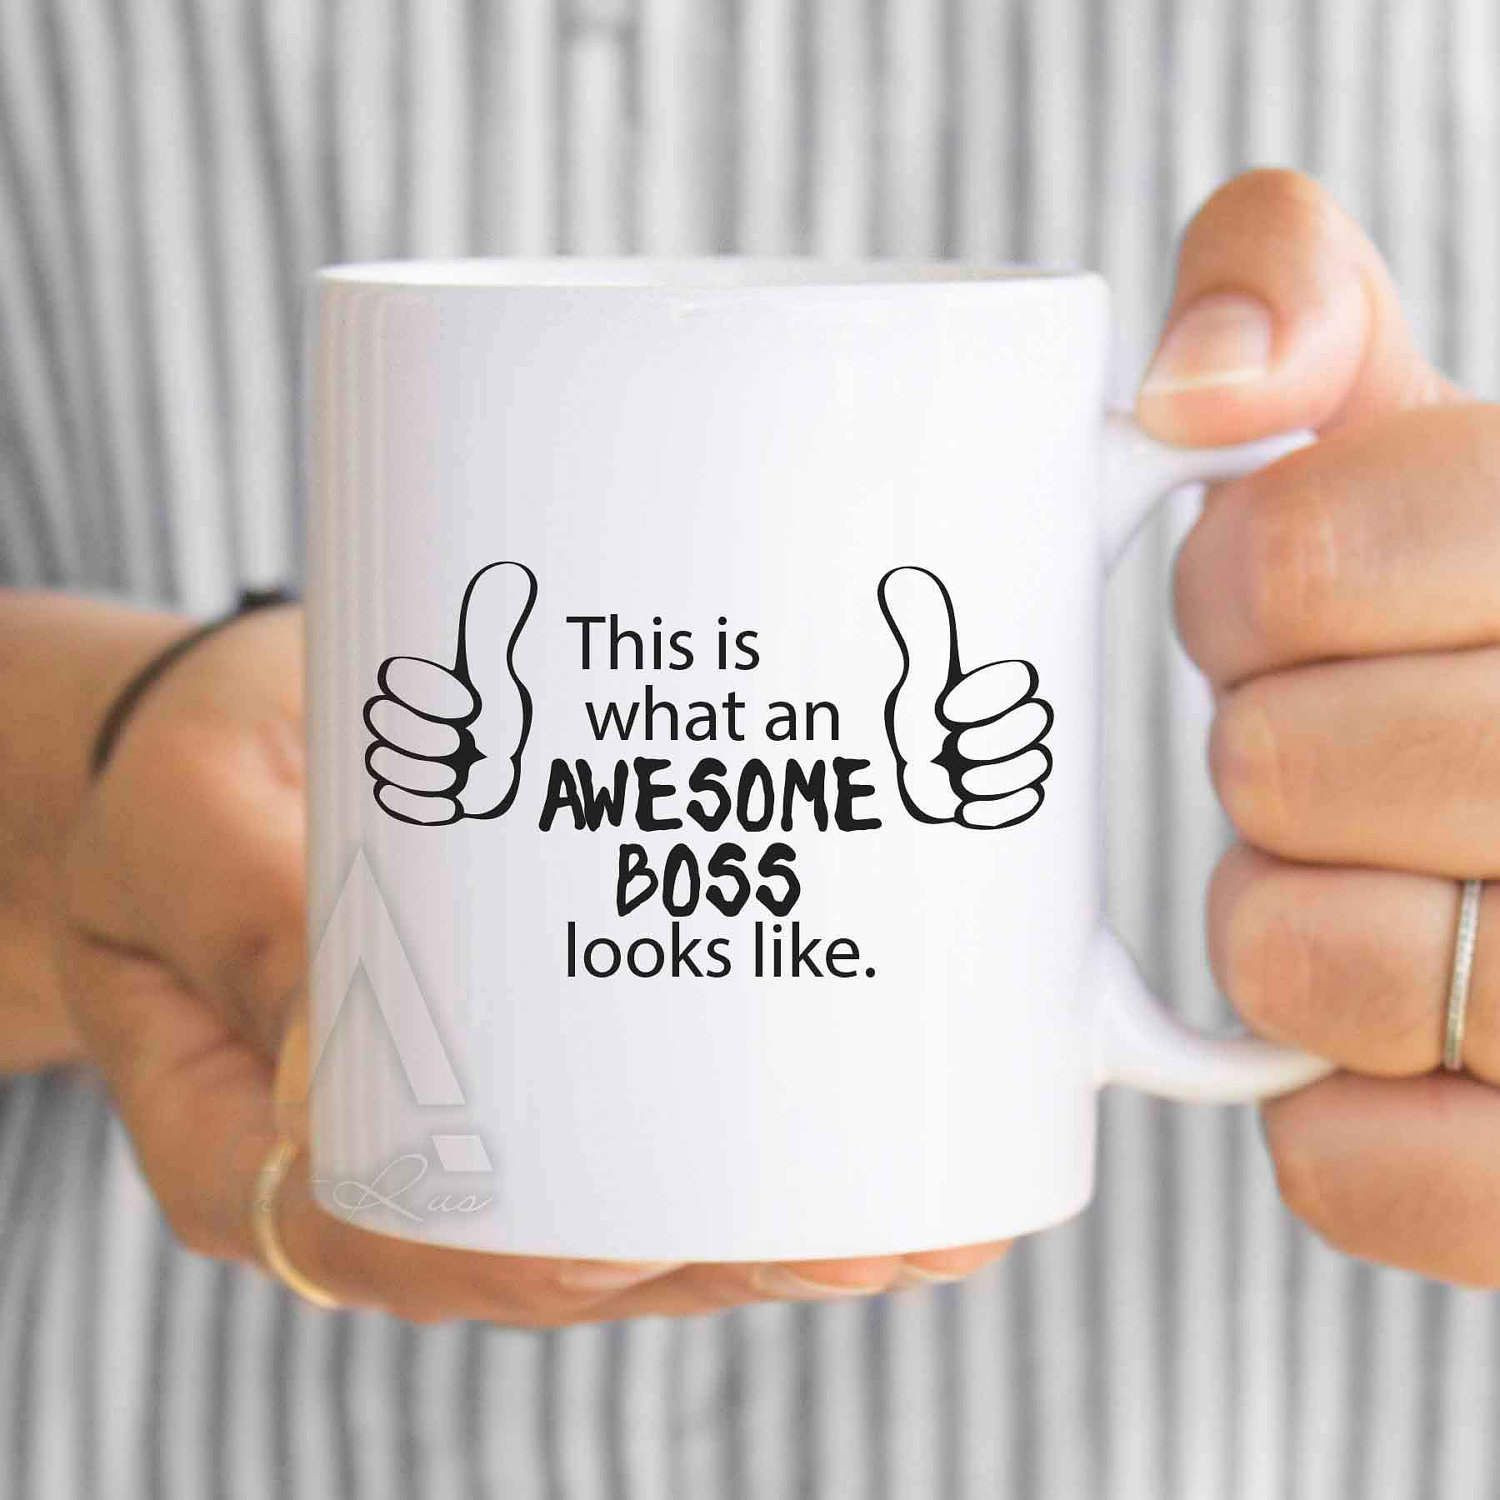 Holiday Gift Ideas For Boss
 Boss ts christmas ts "this is what an awesome boss